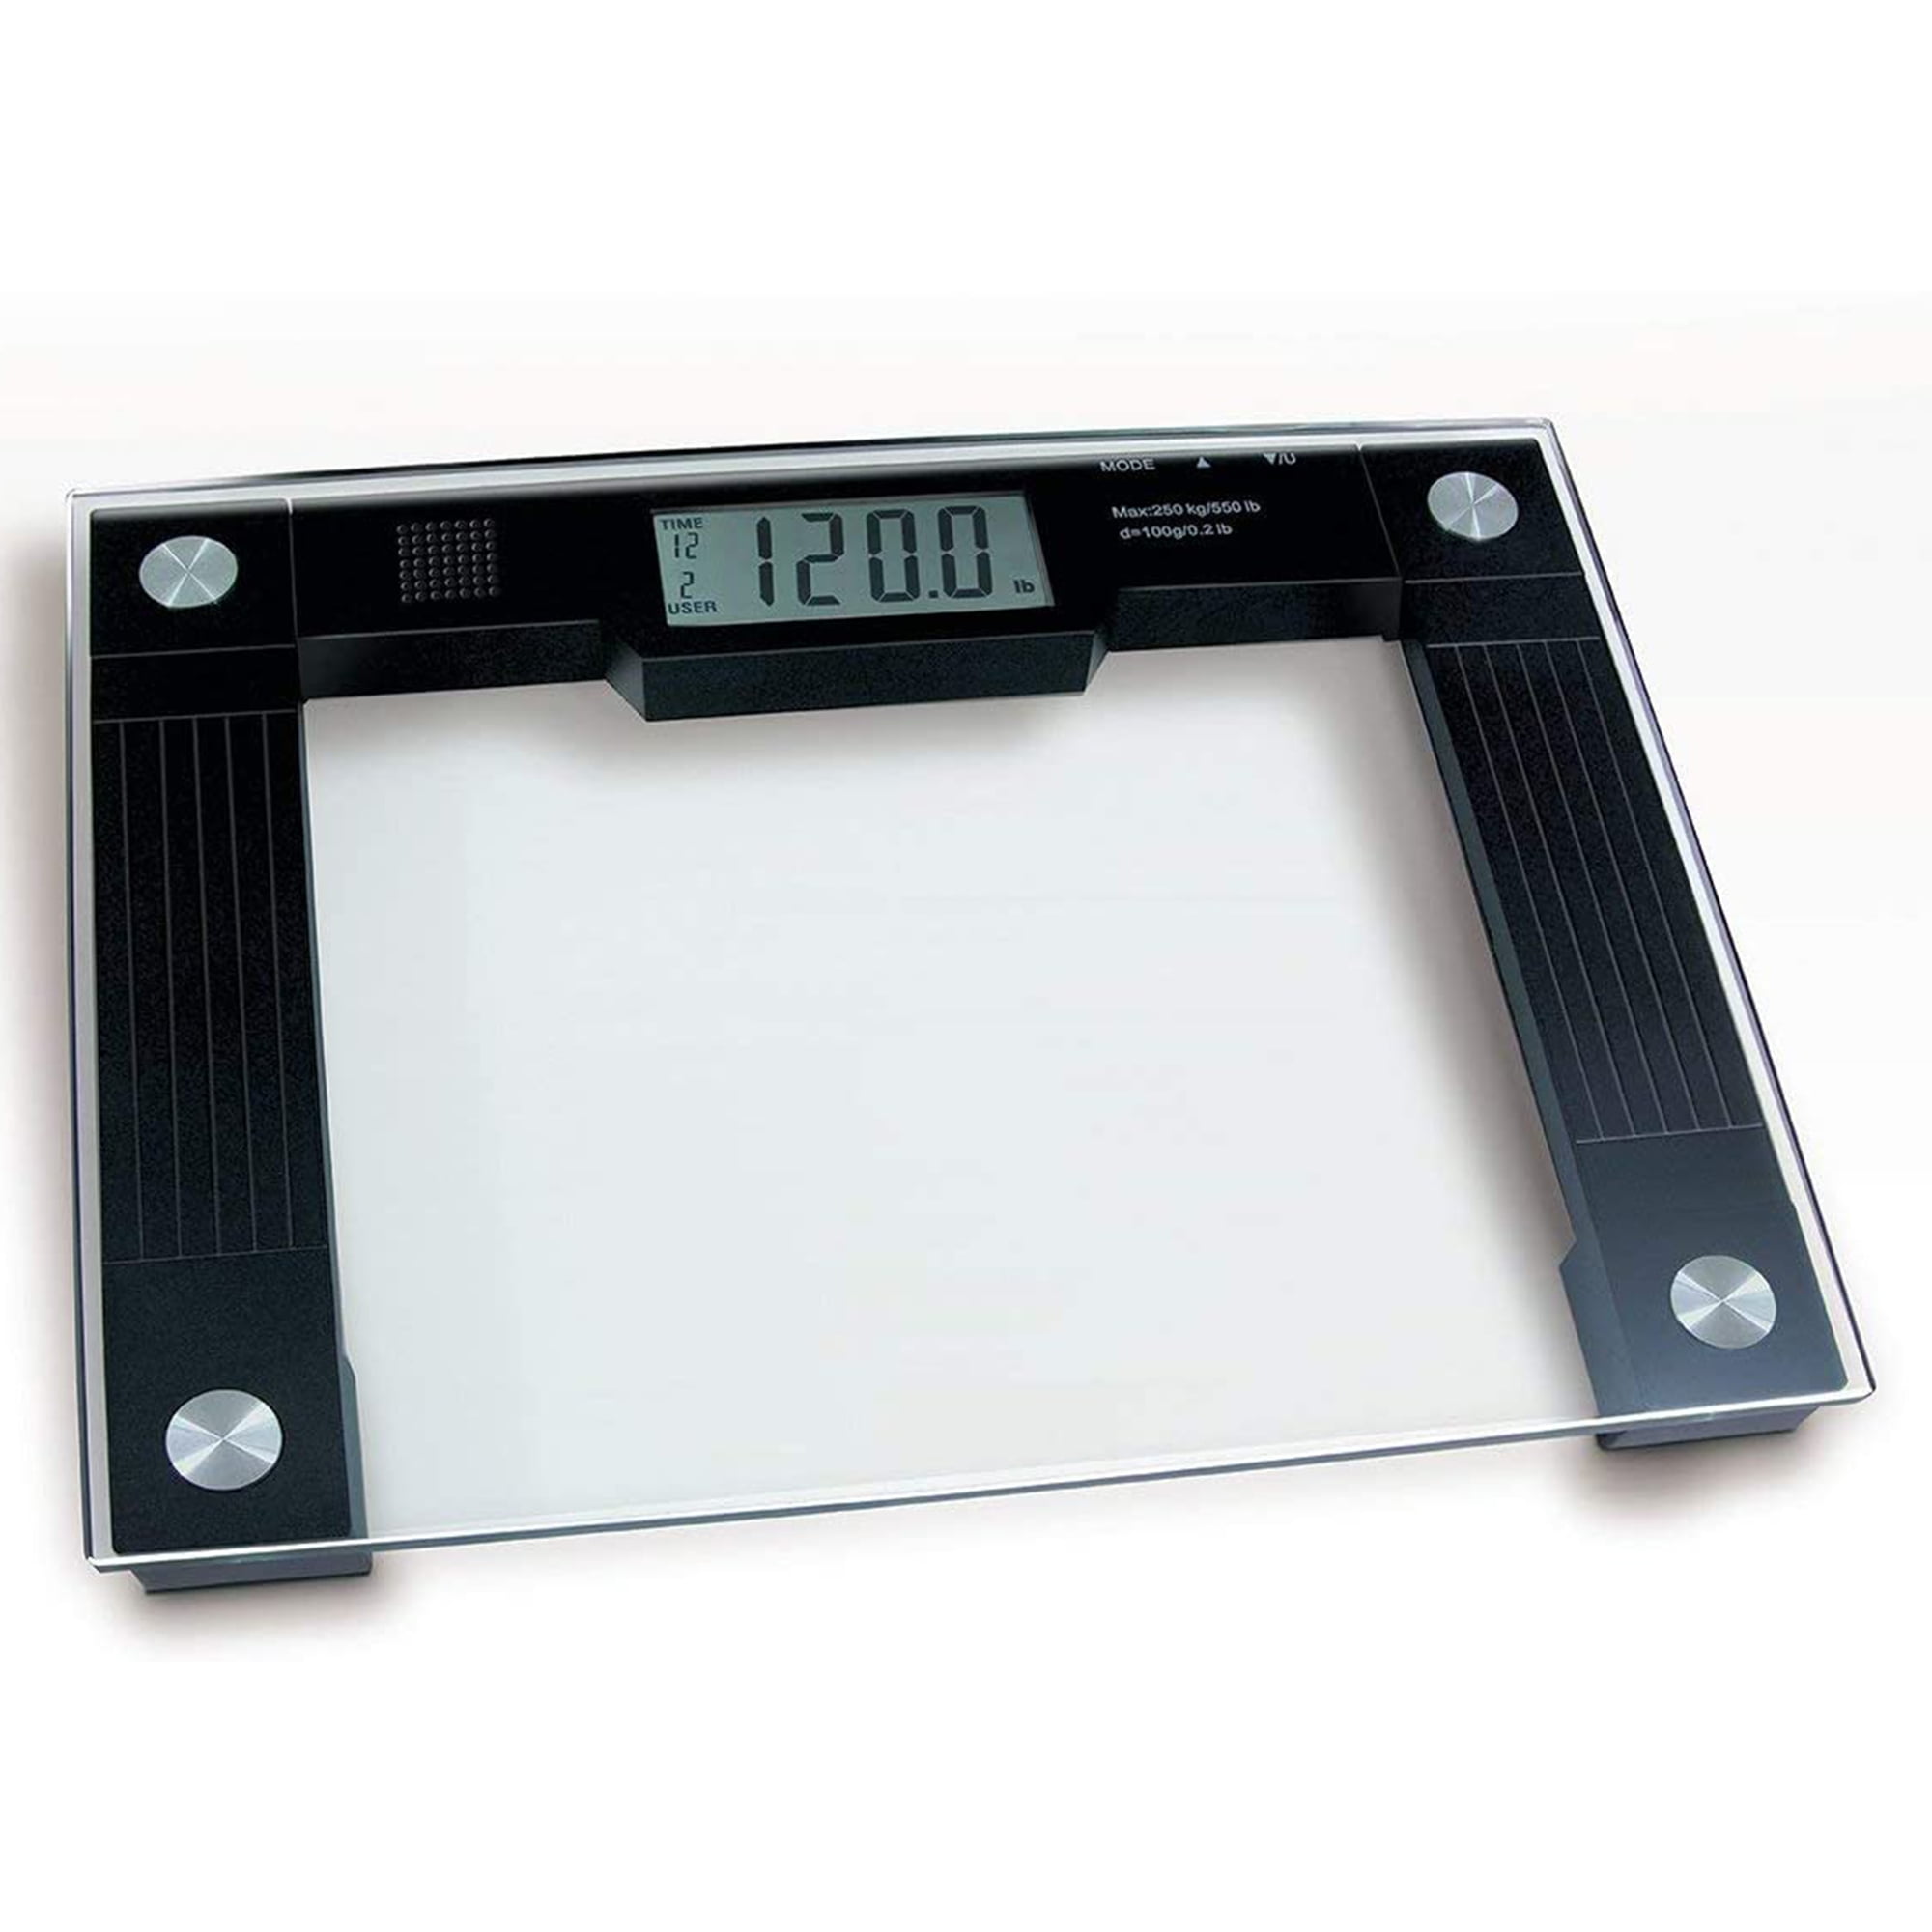 Talking Scales - Big Numbers and Clear Loud Voice Announcement of Weight  (Black)